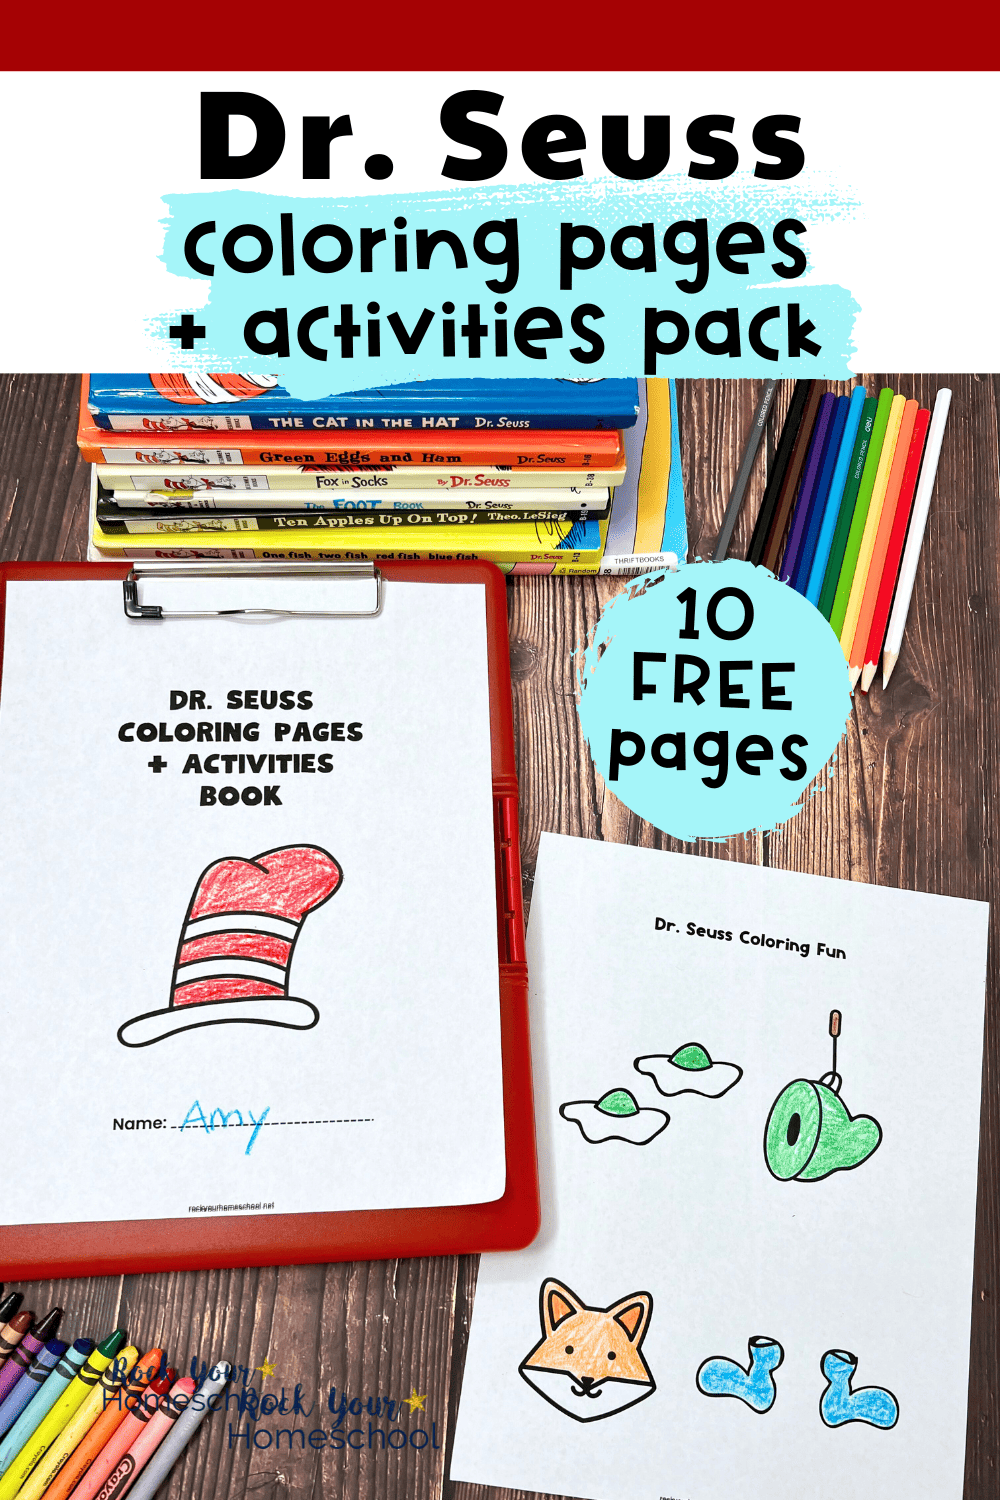 Dr. Seuss Coloring Pages and Activities for Kids (Free Pack)